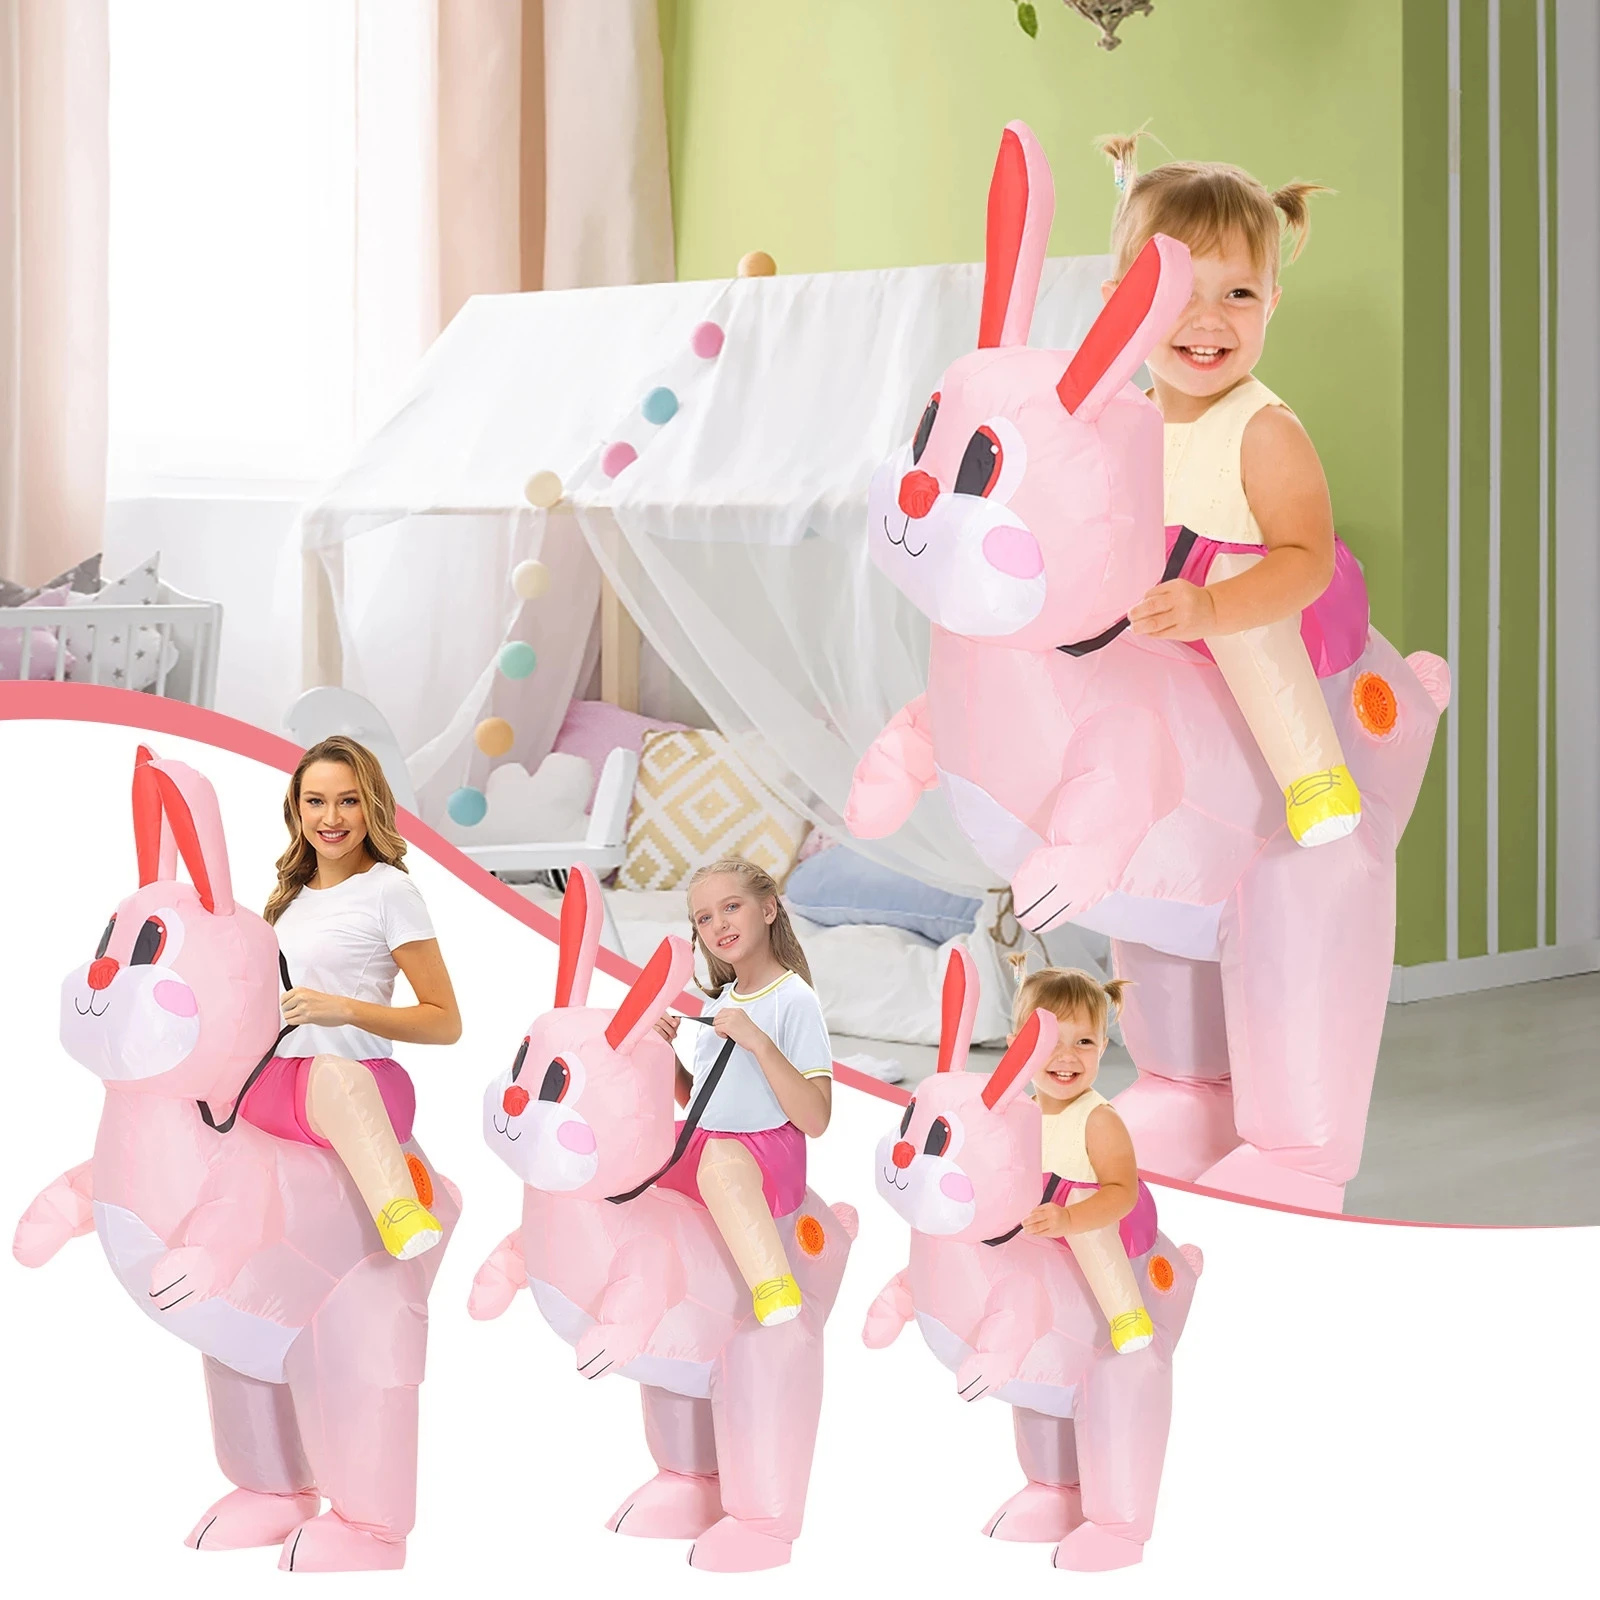 Adult Size Inflatable Rabbit Costume Bunny Jumpsuit Ladies Xmas Gift Cosplay